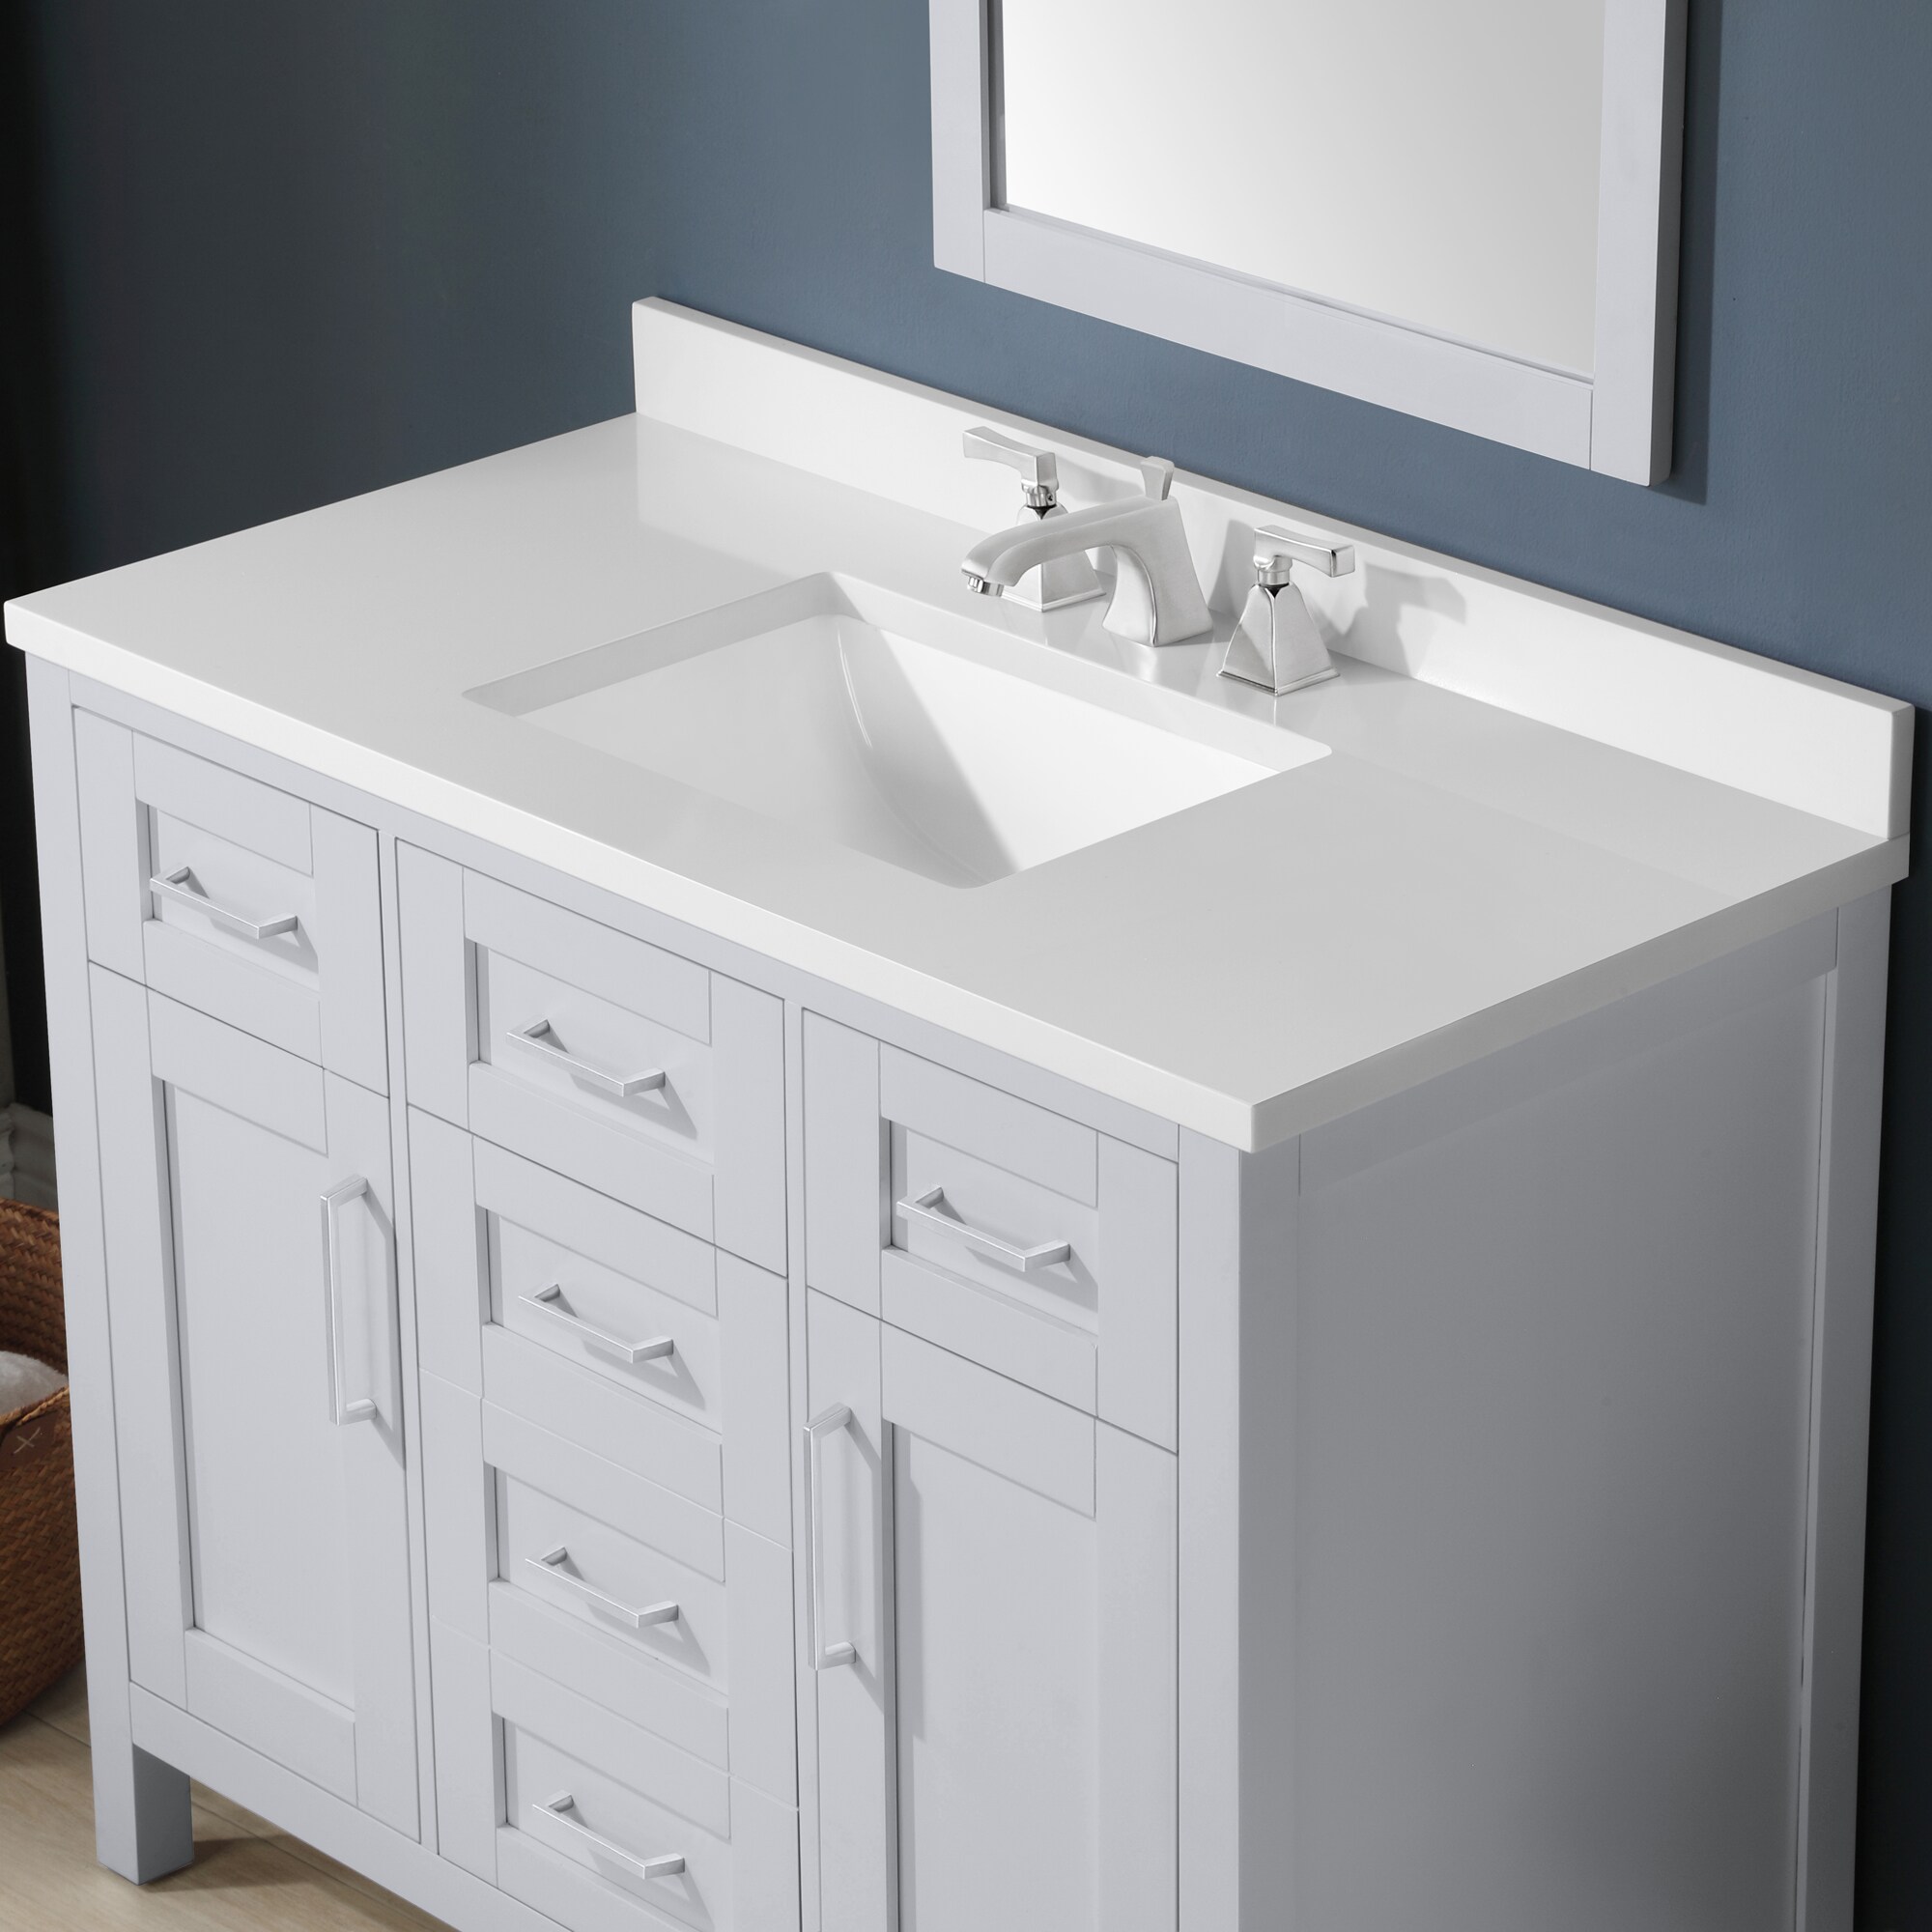 Single Sink Bathroom Vanity in White with USB Power Bar Ove Decors Laney 42 in 